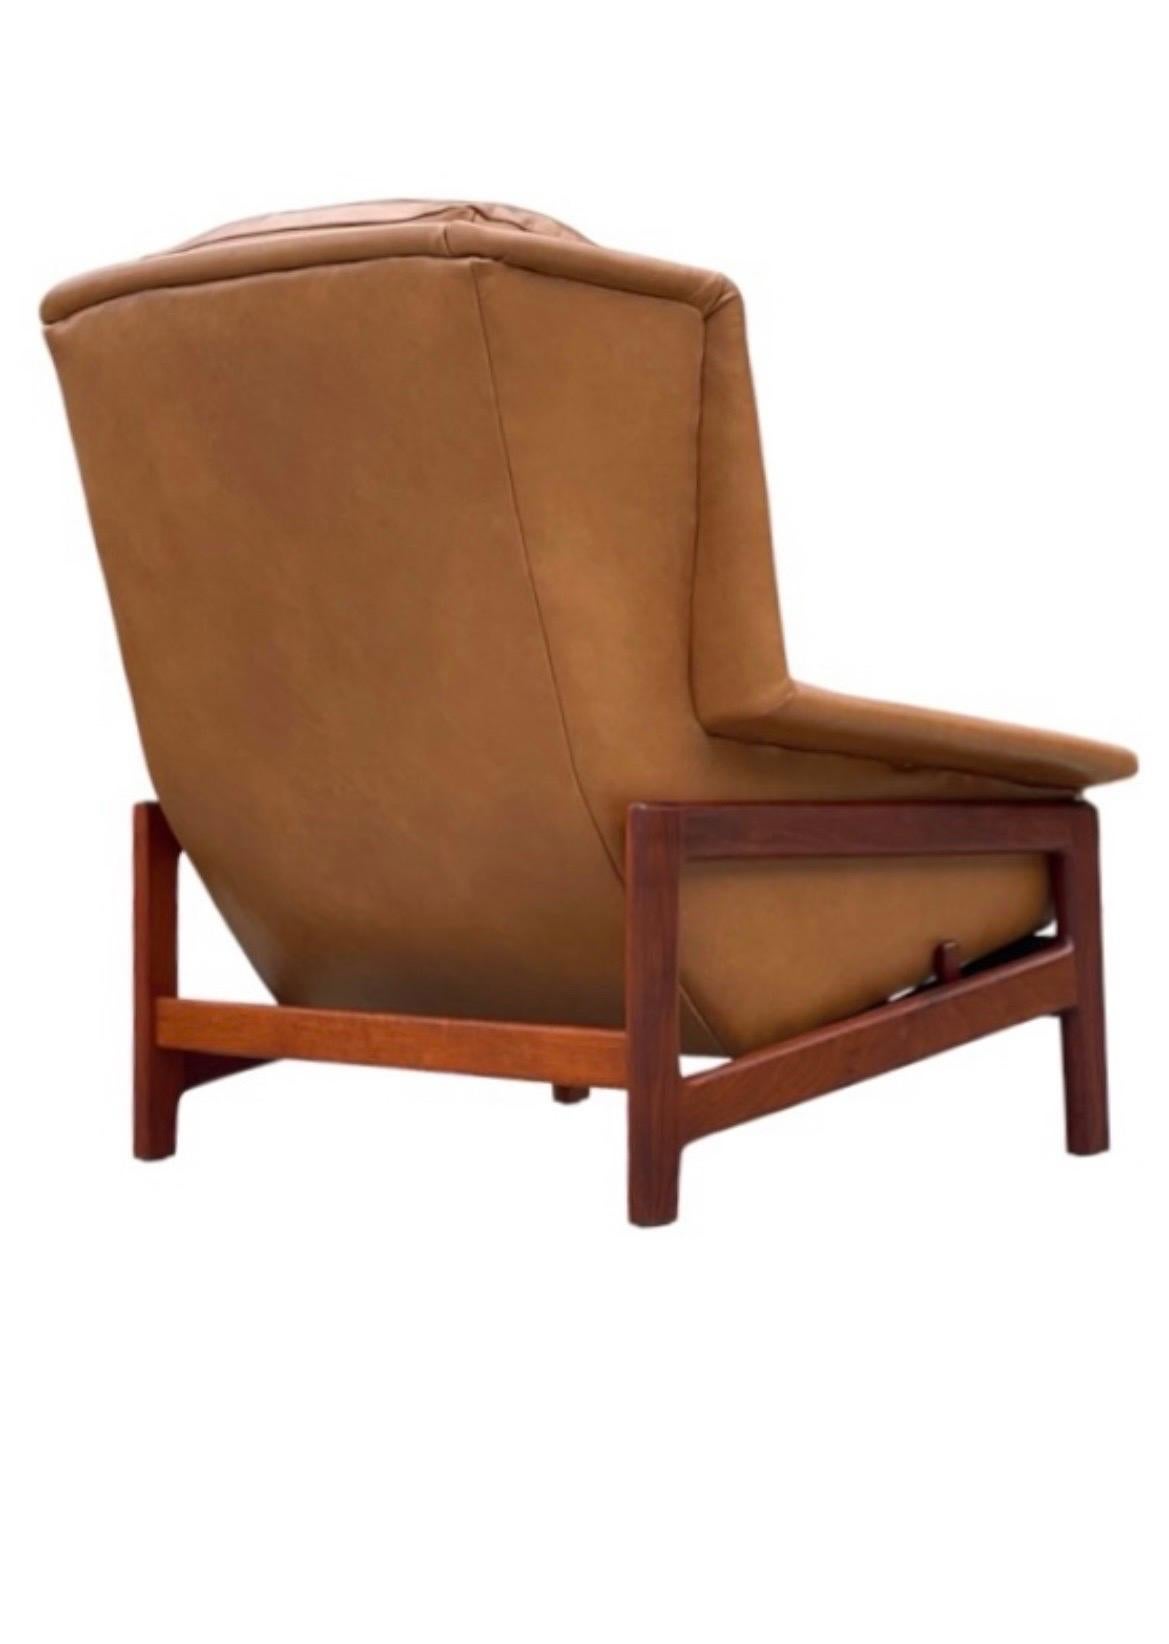 Folke Ohlsson for DUX Reclining + Rocking Lounge Chair in Leather + Walnut 2